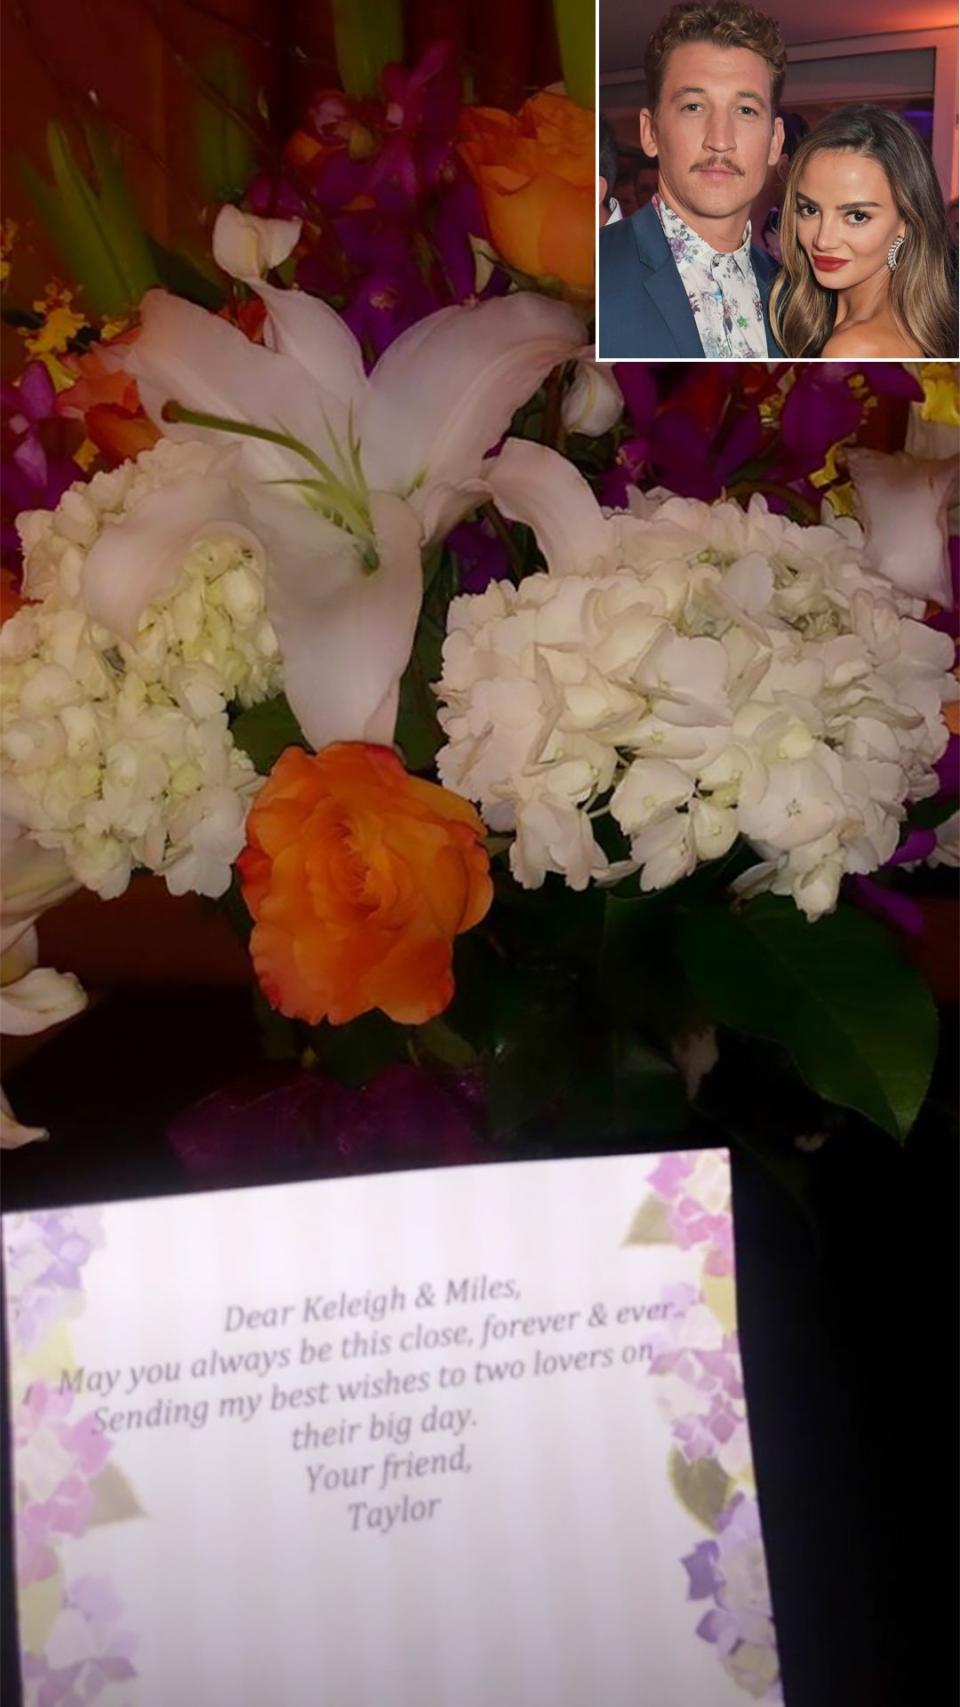 The <em>Divergent</em> actor and his model love tied the knot in Hawaii over Labor Day weekend 2019, and though pal Swift wasn't there to celebrate with them, she was there in spirit thanks to a floral arrangement and sweet note that quoted lyrics from her latest single, "Lover." "May you always be this close, forever & ever. Sending my best wishes to to two lovers on their big day. Your friend, Taylor," she wrote.